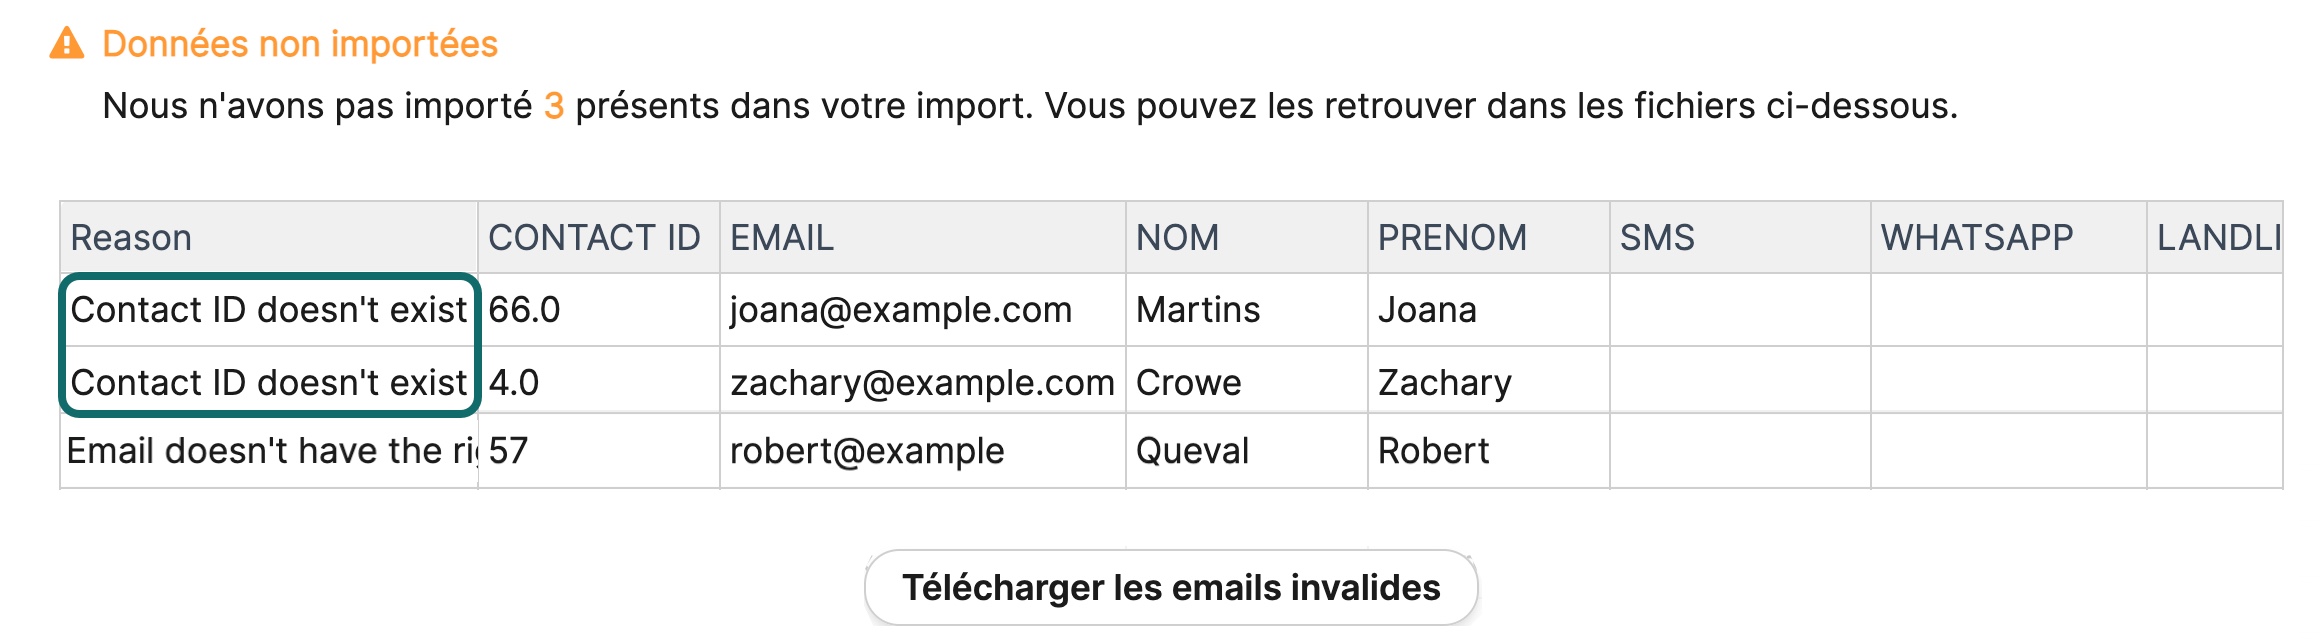 contacts_contact_ID_report_fr.jpg